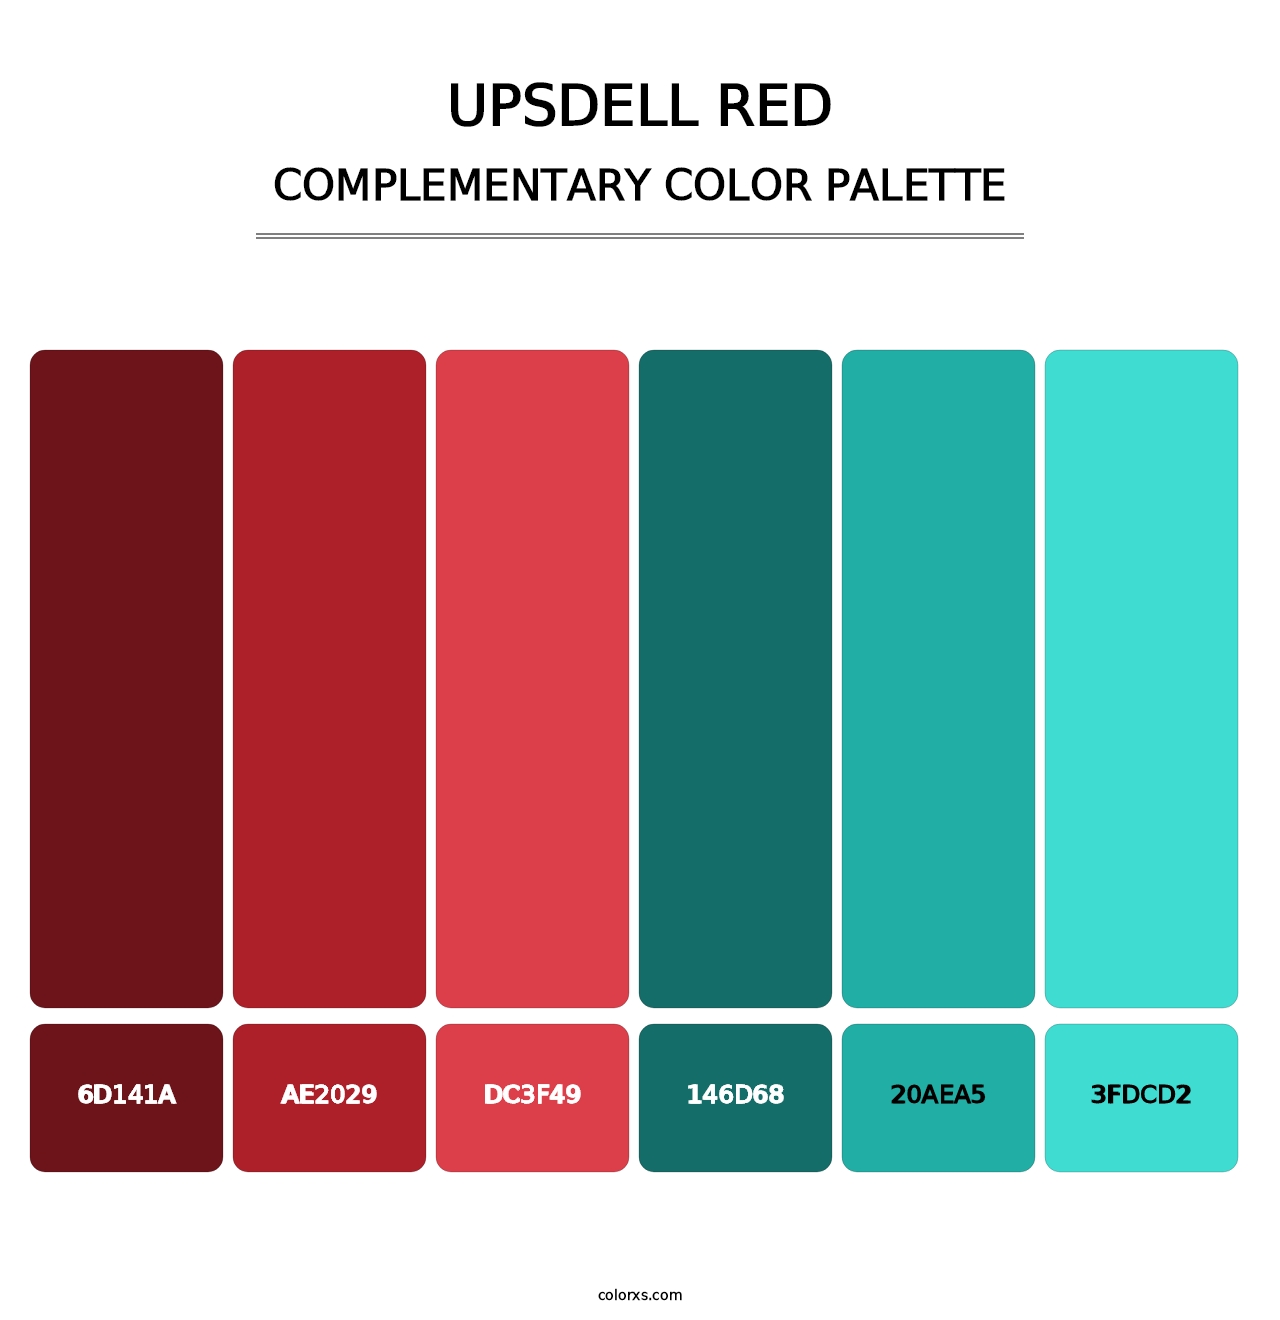 Upsdell Red - Complementary Color Palette